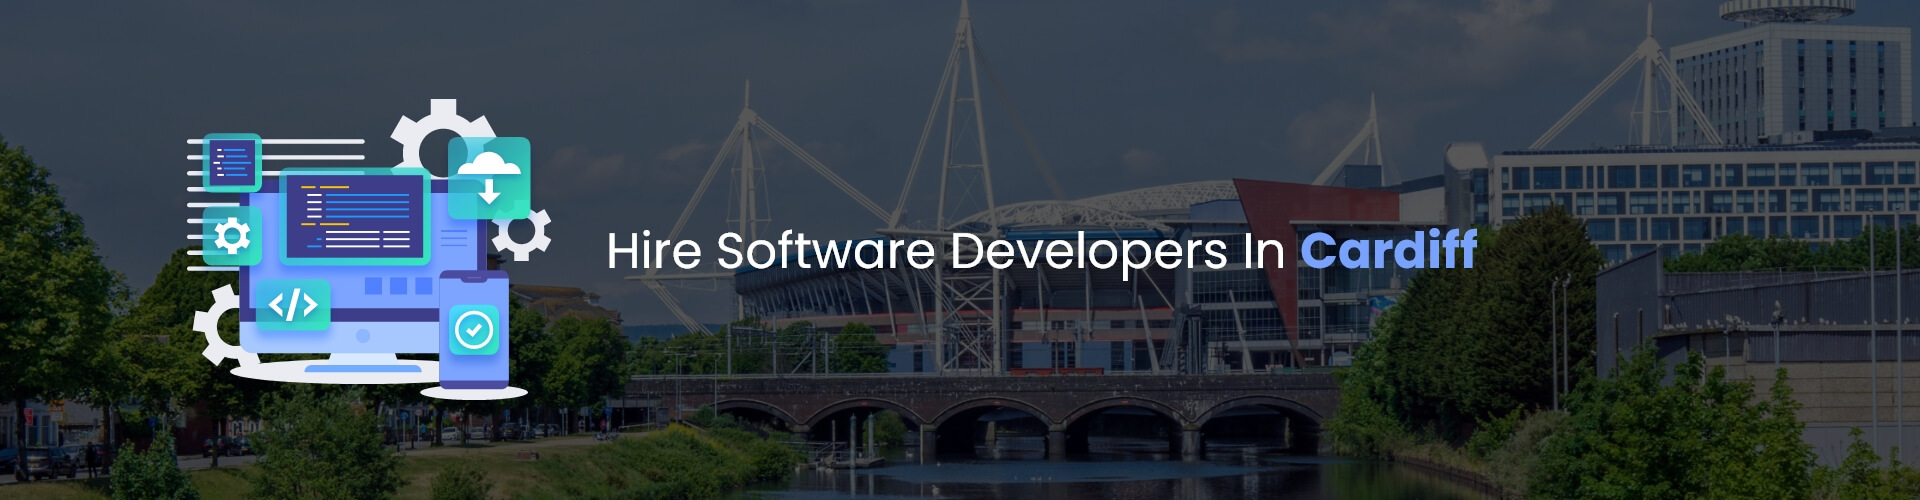 hire software developers in cardiff